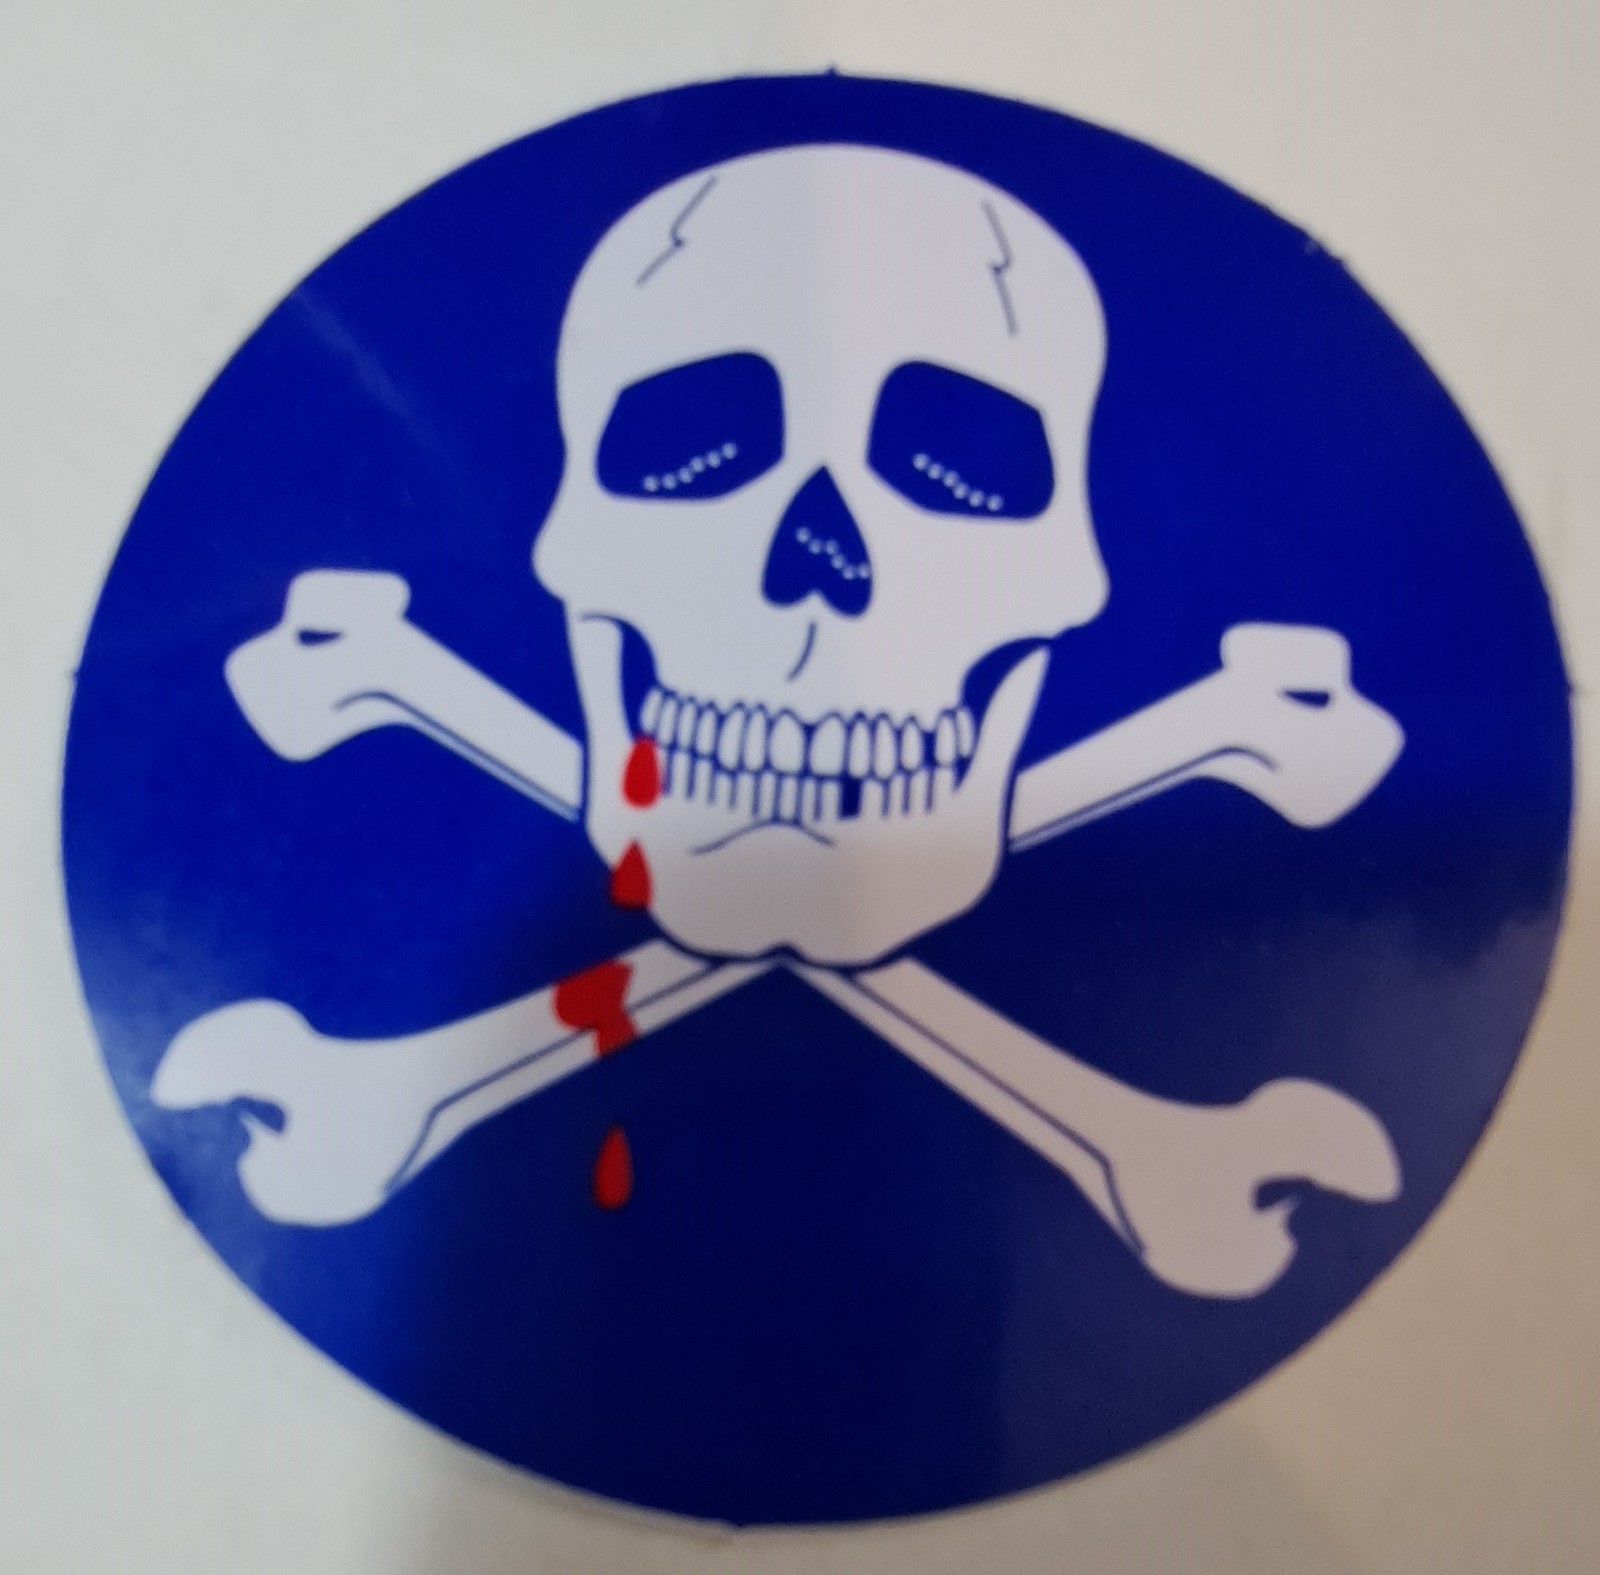 Primary image for Skull & Crossbones with blood dripping blue vinyl sticker 3" round